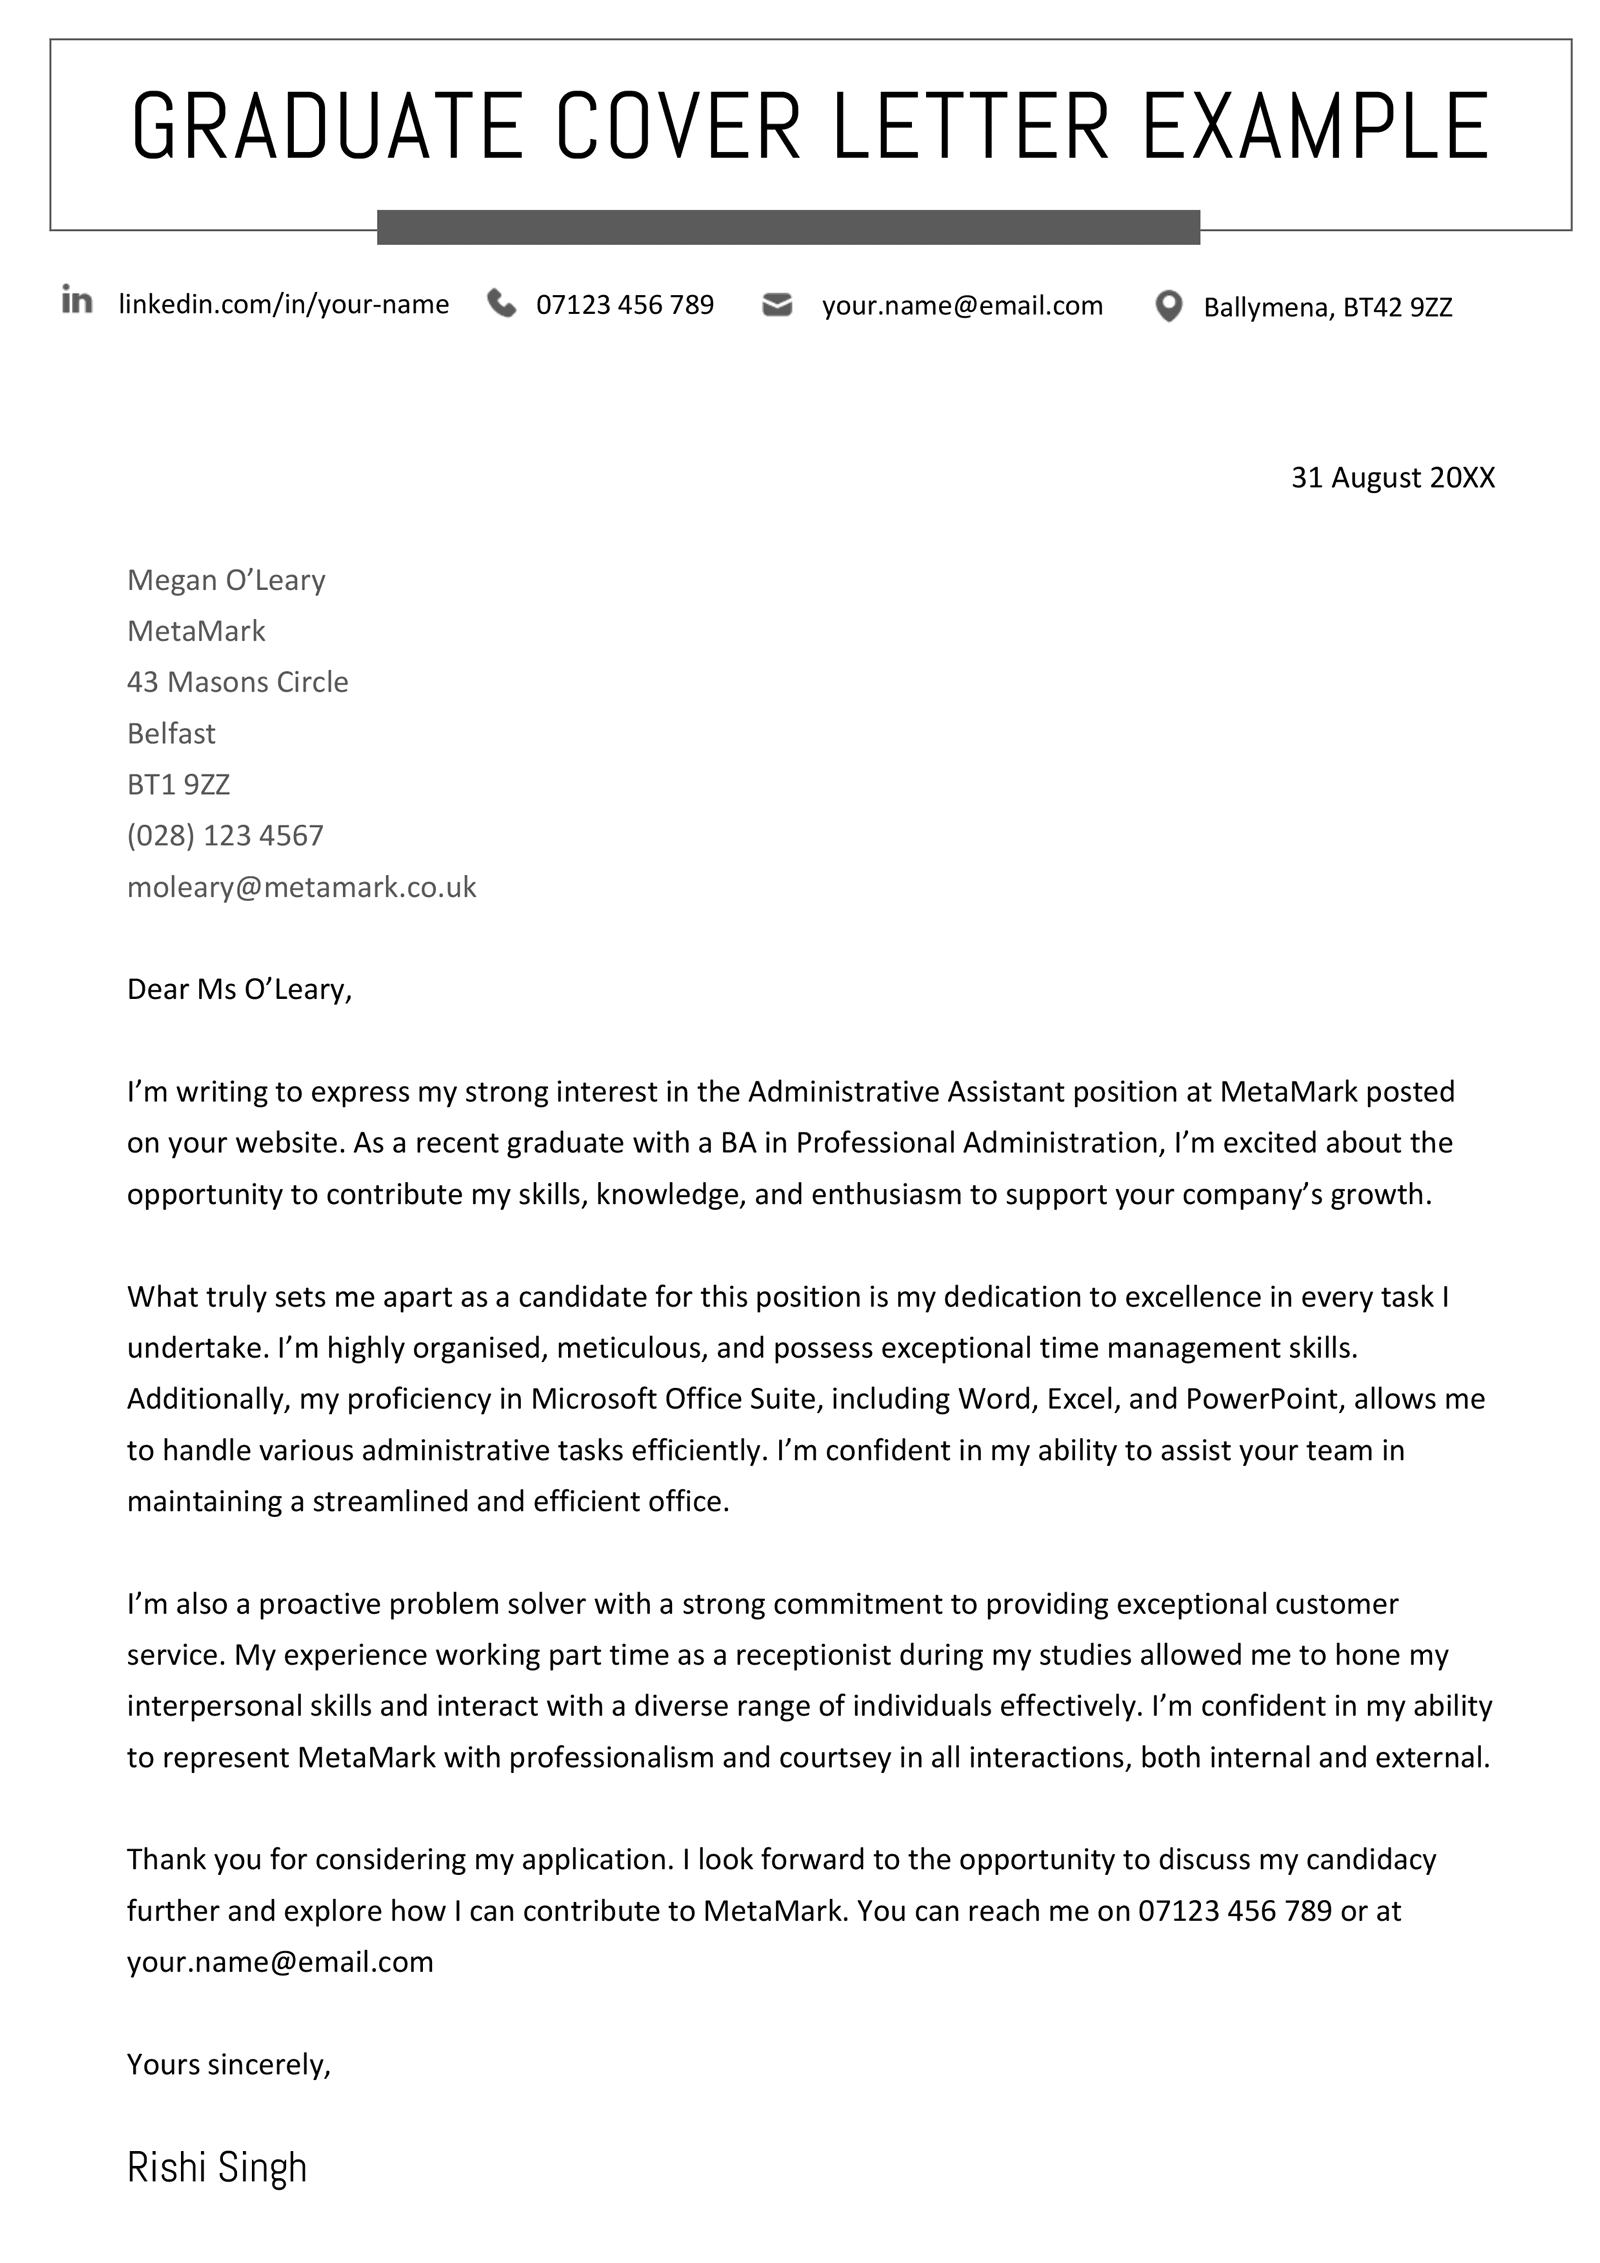 A graduate cover letter example in a blue-themed template.